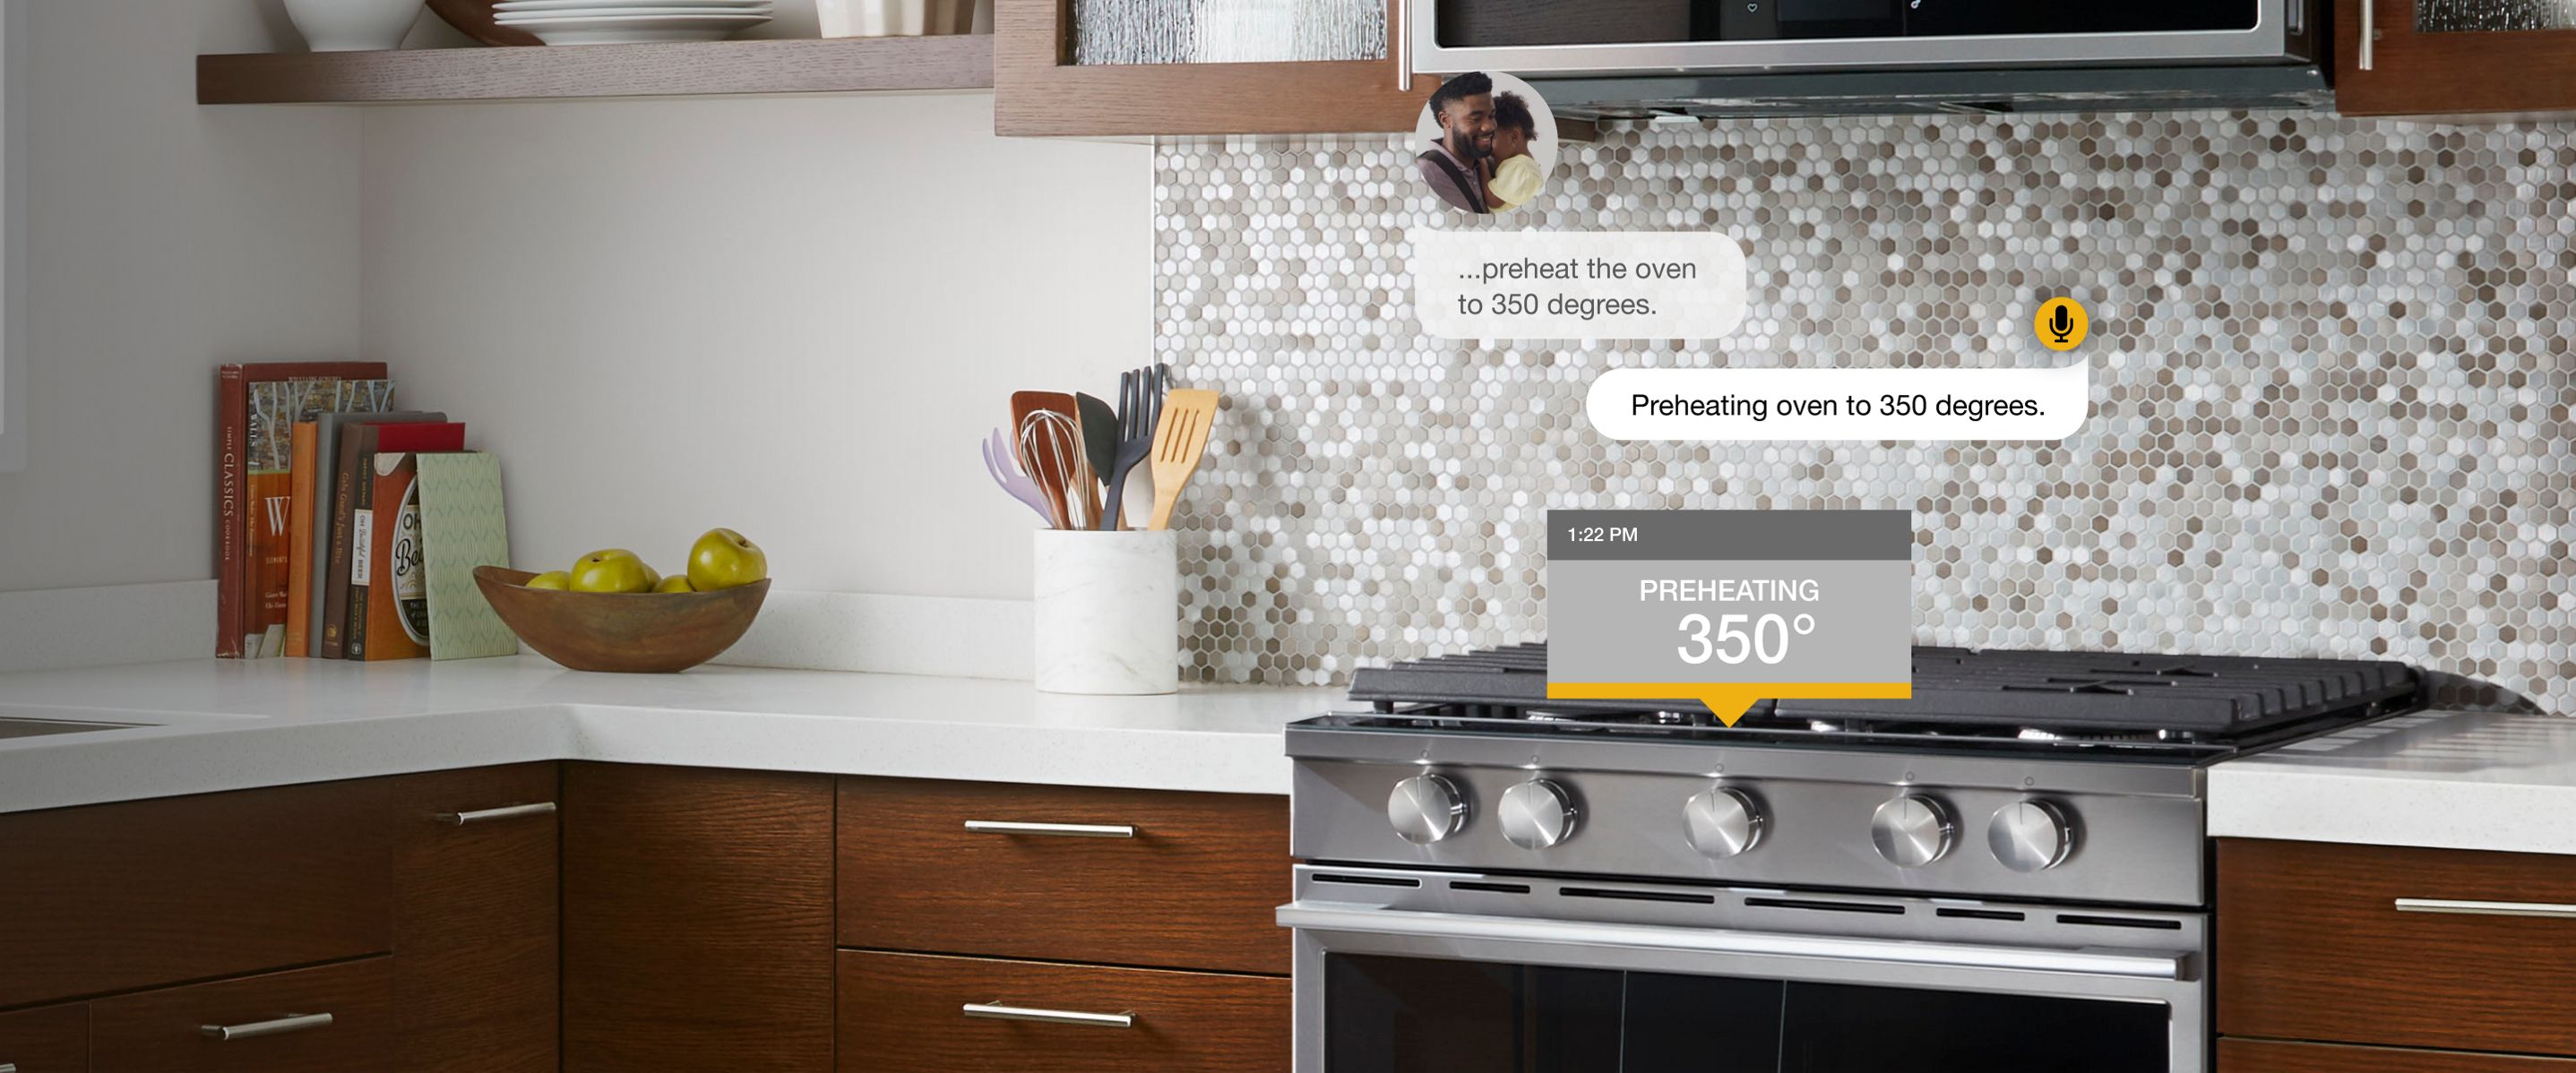 Voice command to preheat oven and Whirlpool® Smart Slide-In Range reacting